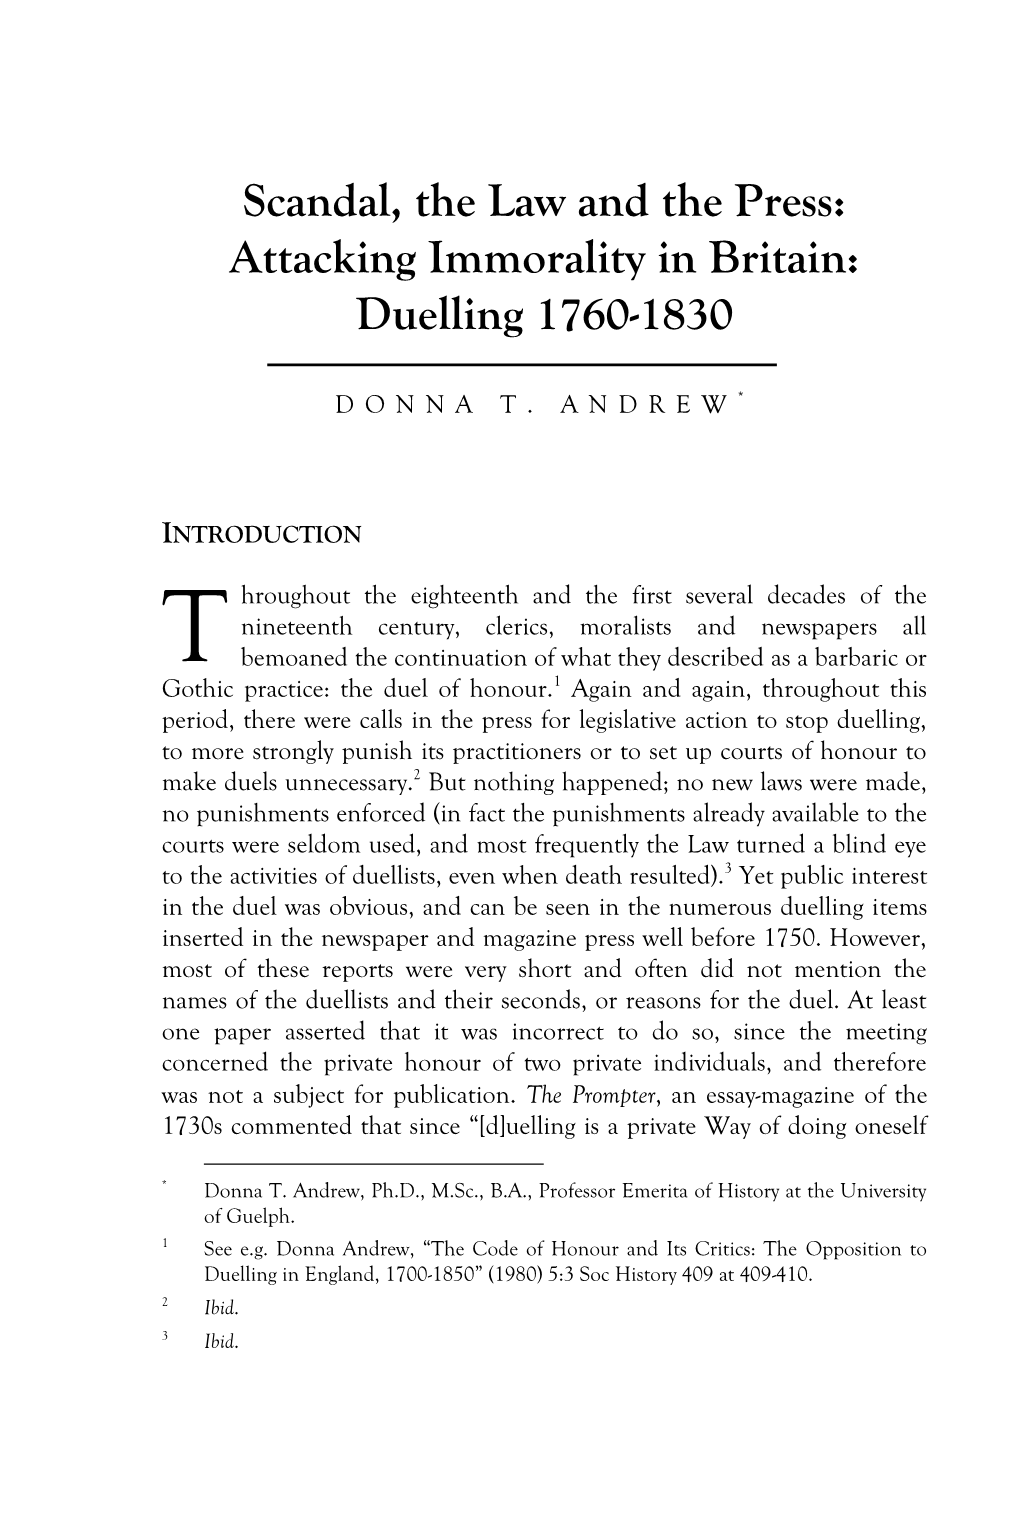 Duelling 1760-1830